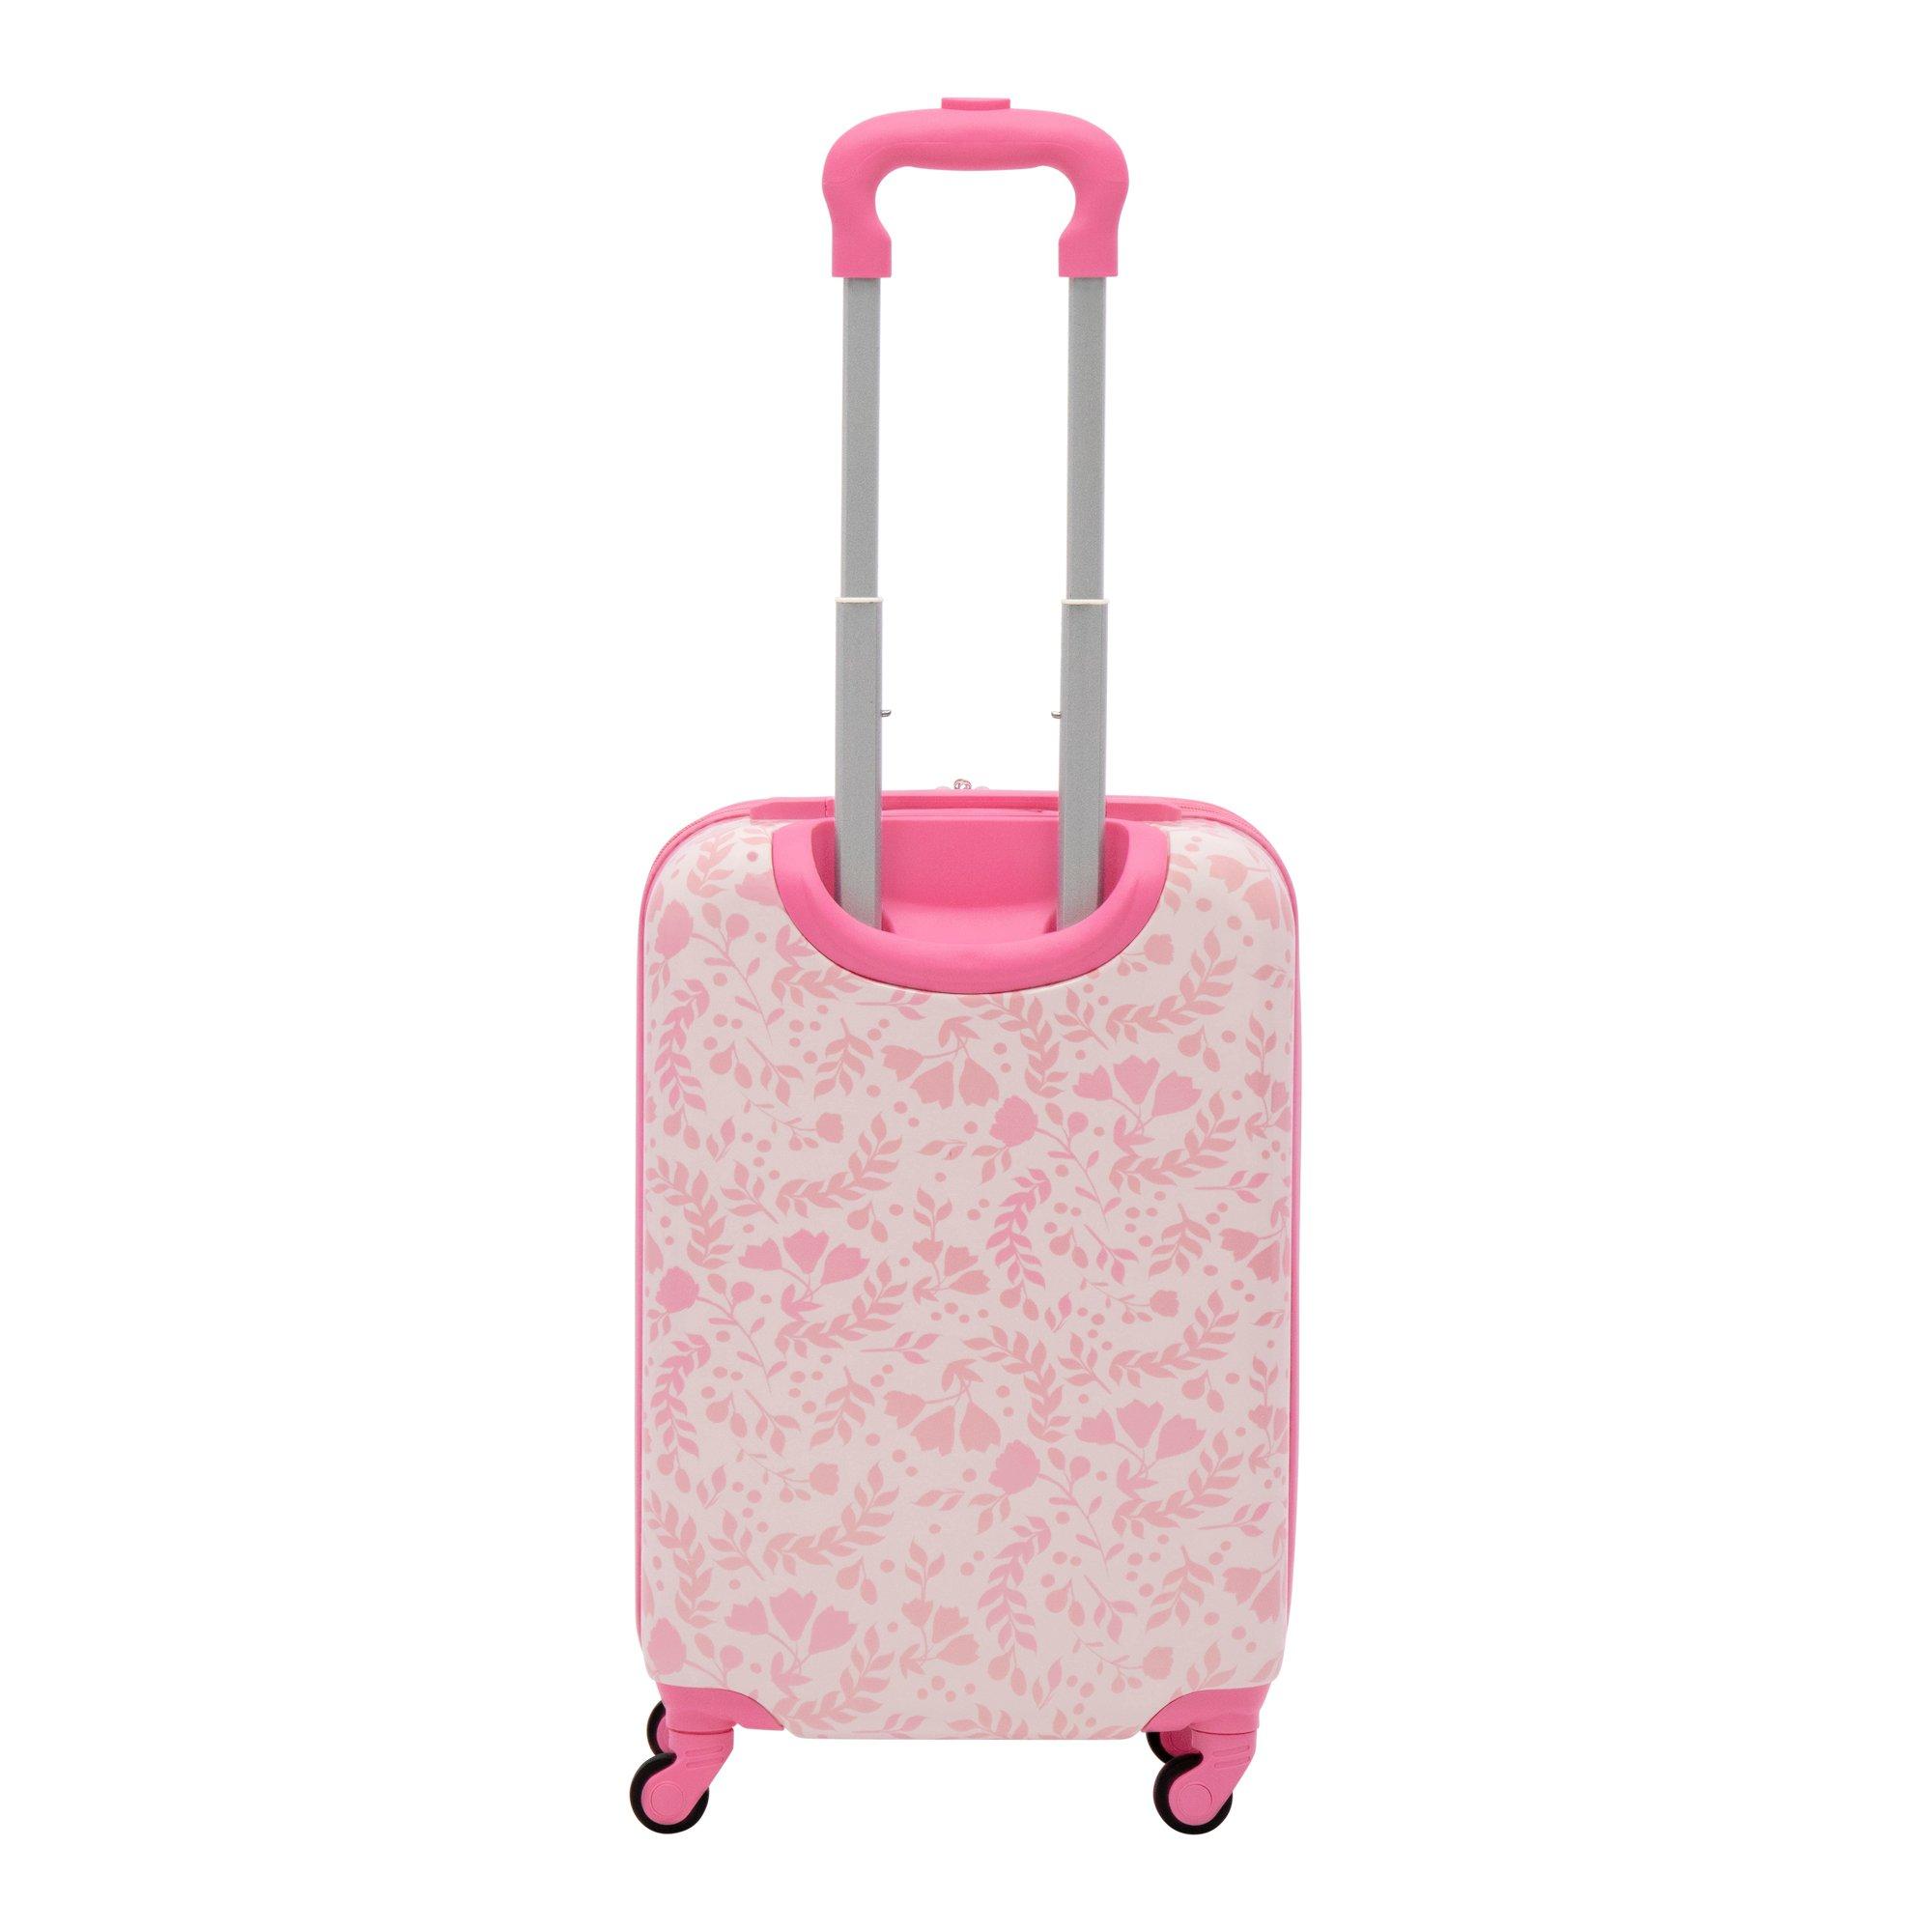 FUL Disney Minnie Mouse Pose with Floral Background Kids 21-in Hard-Sided Carry-On Luggage